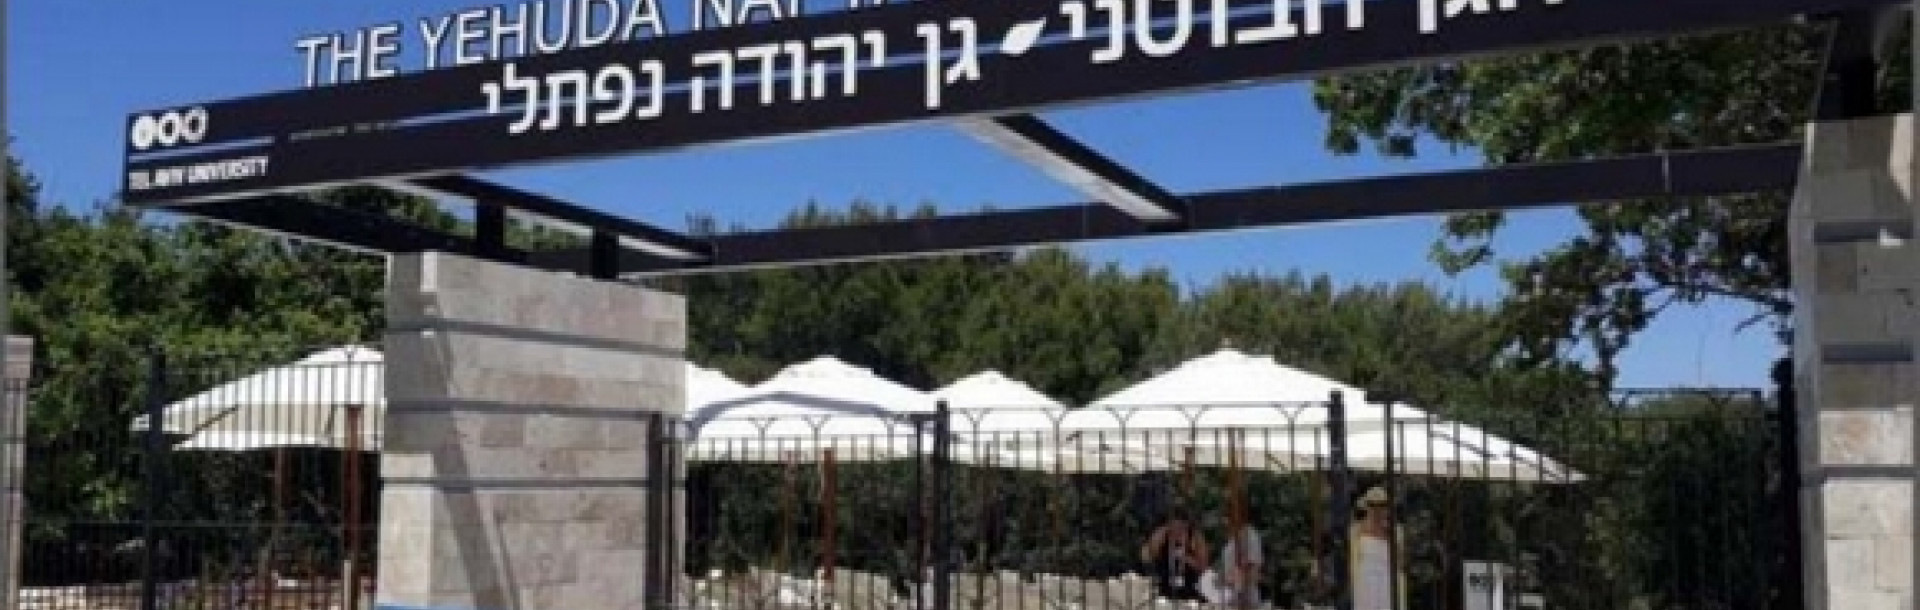 At the year 2019, the Tel Aviv University Botanical Garden was renamed, and now it is The Yehuda Naftali Botanical Garden. 